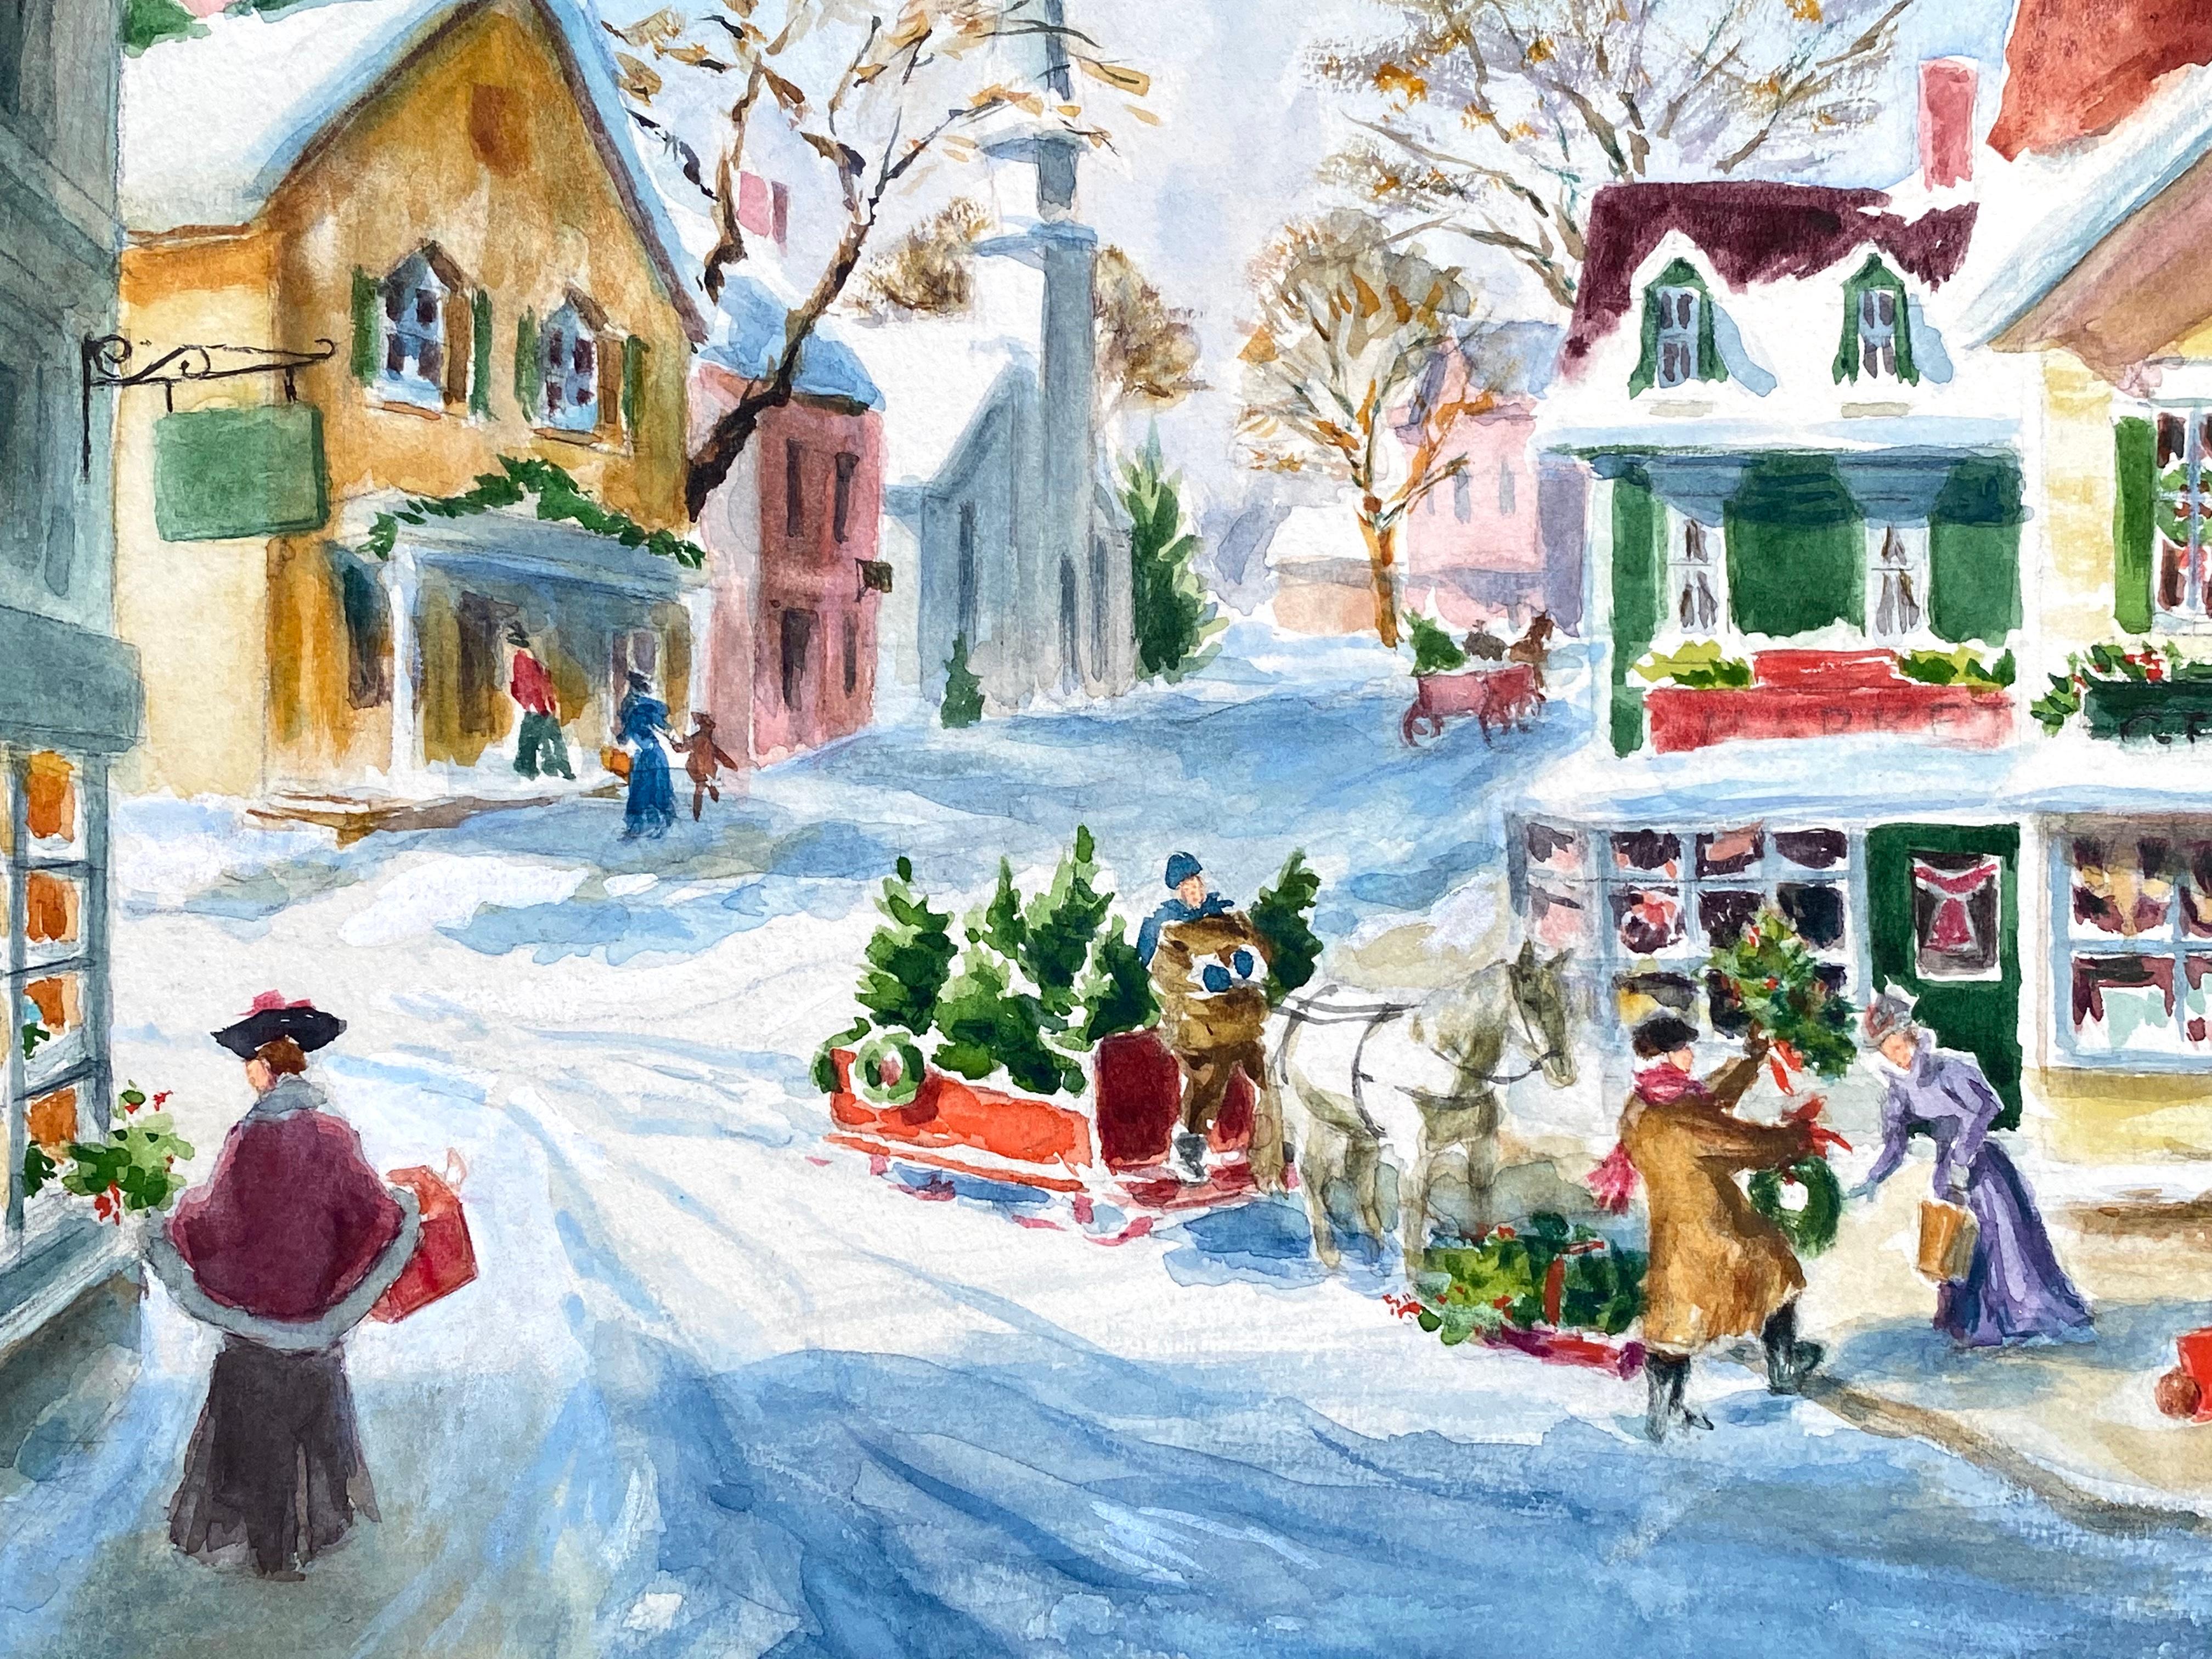 “Train Station, Christmas” - Other Art Style Art by Louise Clasper Rumely